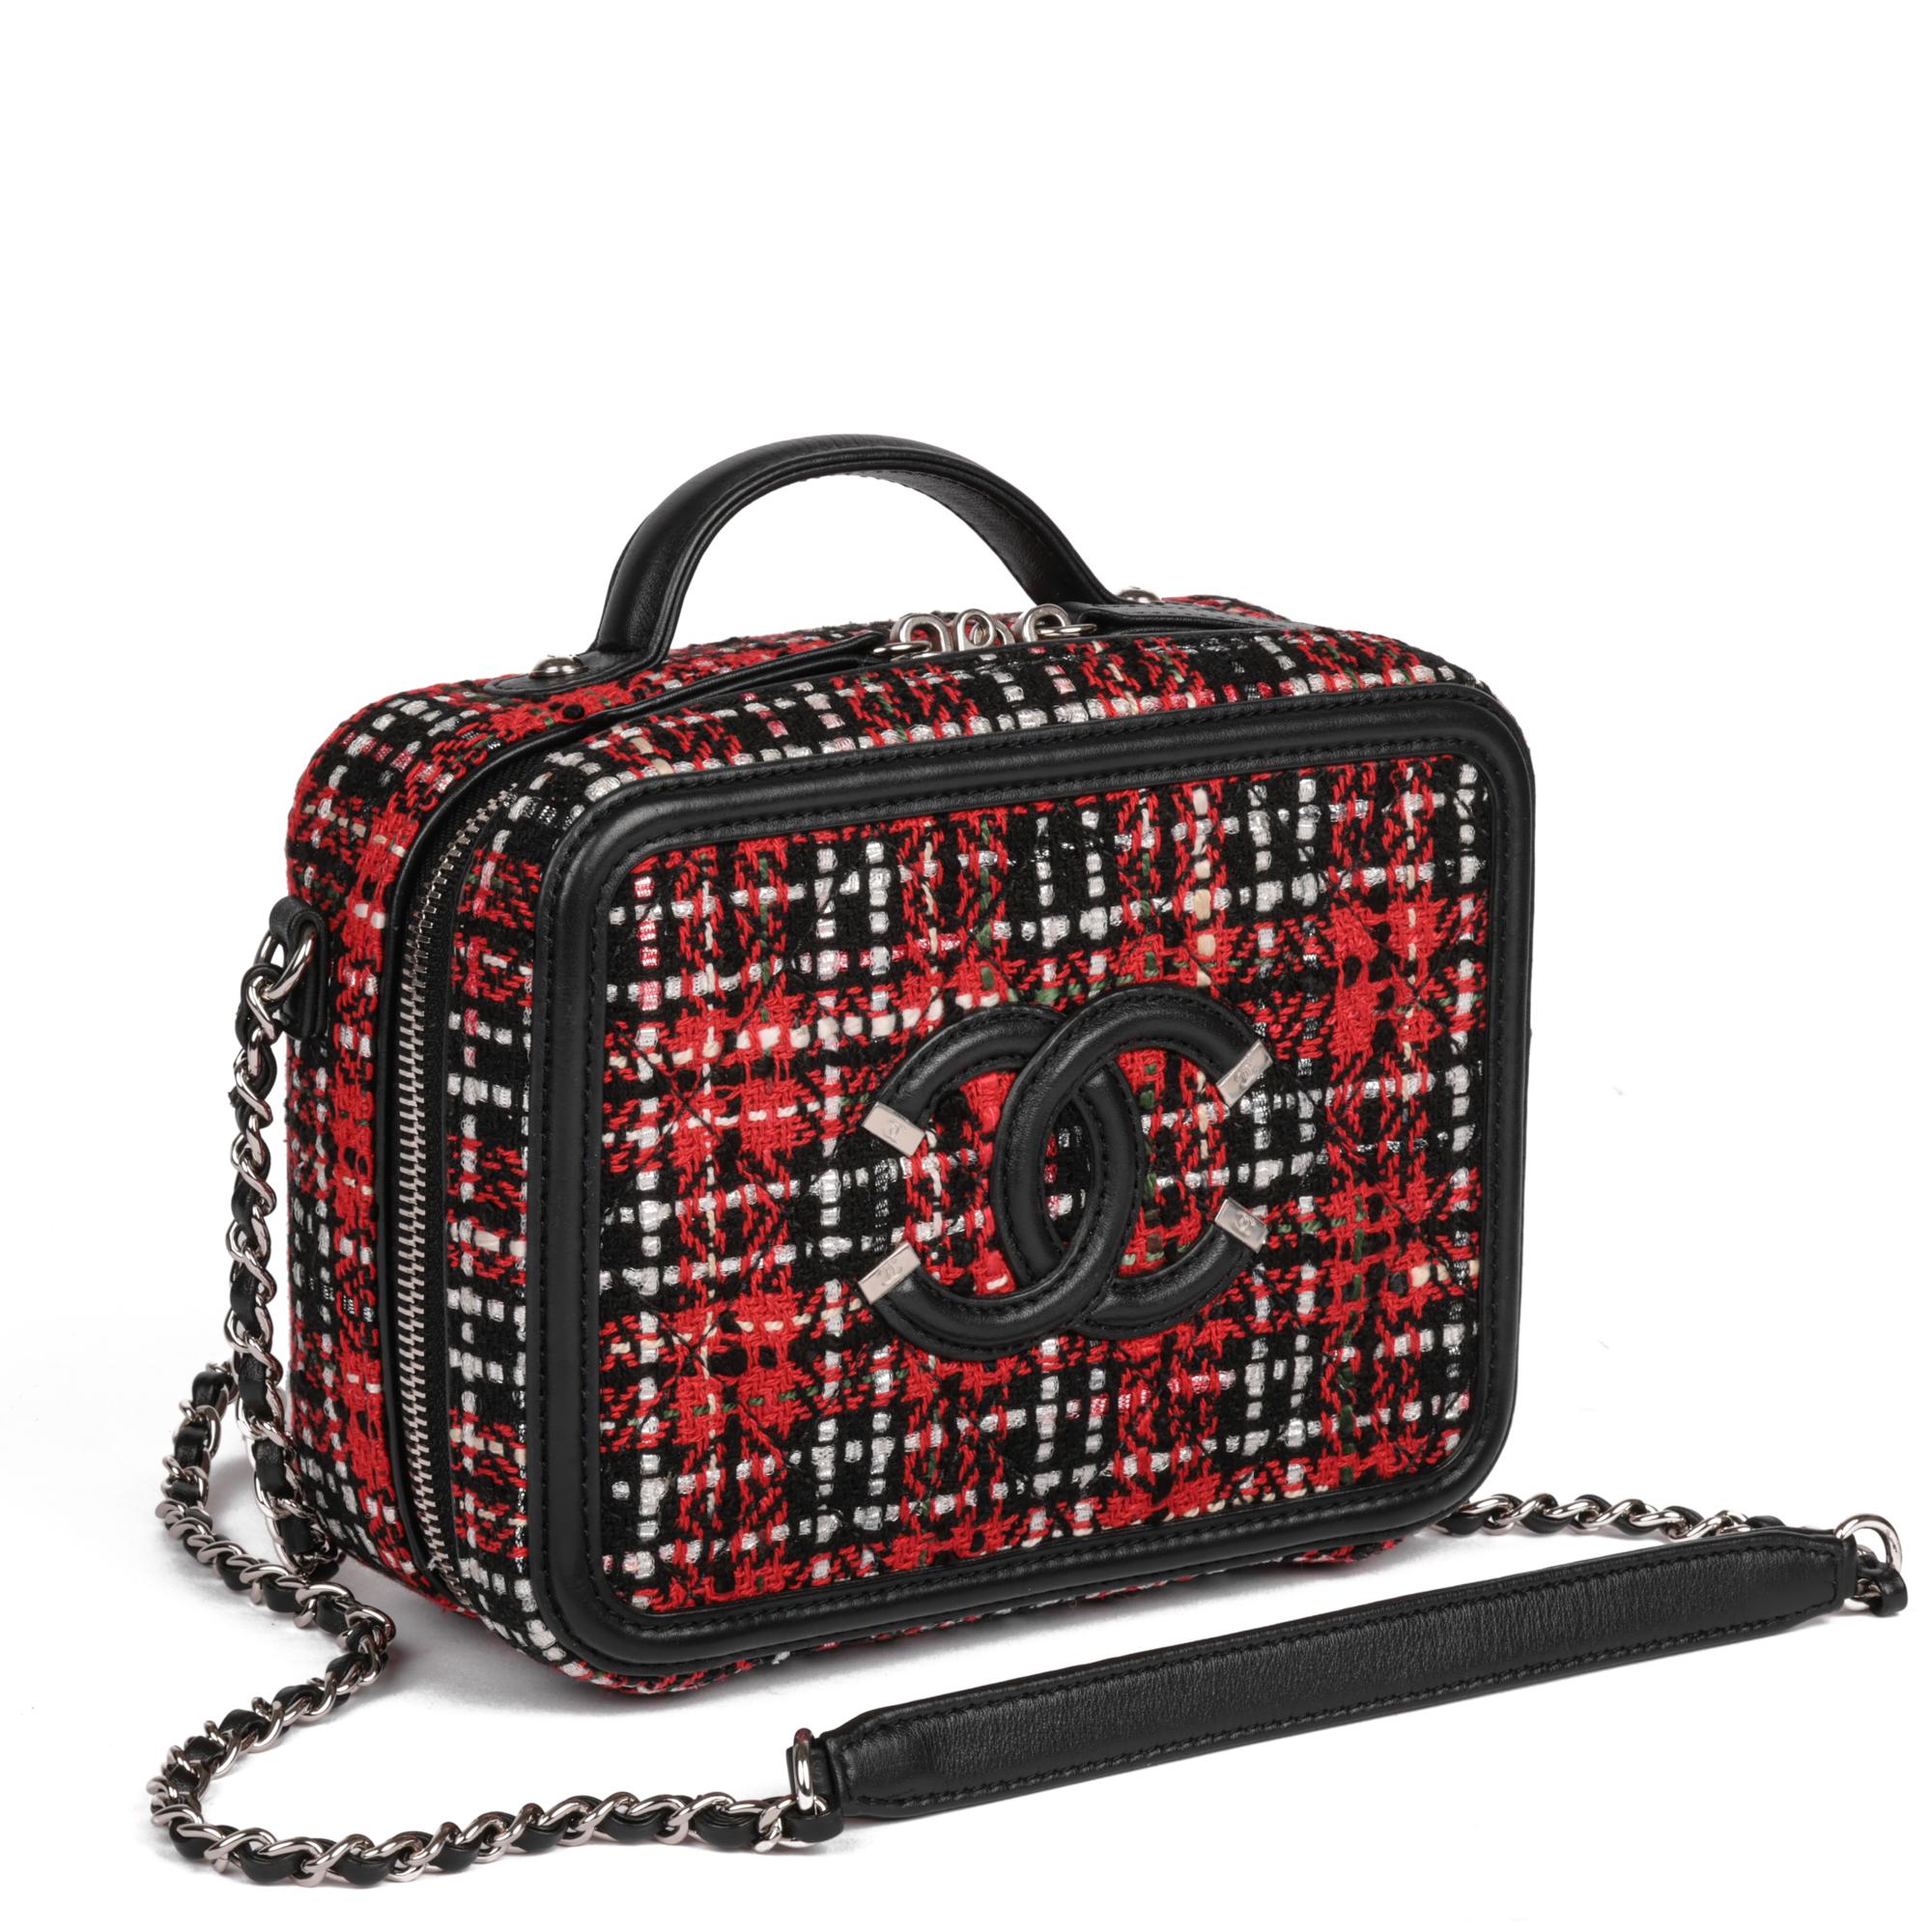 CHANEL
Red Tweed & Black Lambskin Leather Small Filigree Vanity Case

Xupes Reference: HB5183
Serial Number: 29888314
Age (Circa): 2019
Accompanied By: Chanel Dust Bag, Authenticity Card, Clochette
Authenticity Details: Authenticity Card, Serial